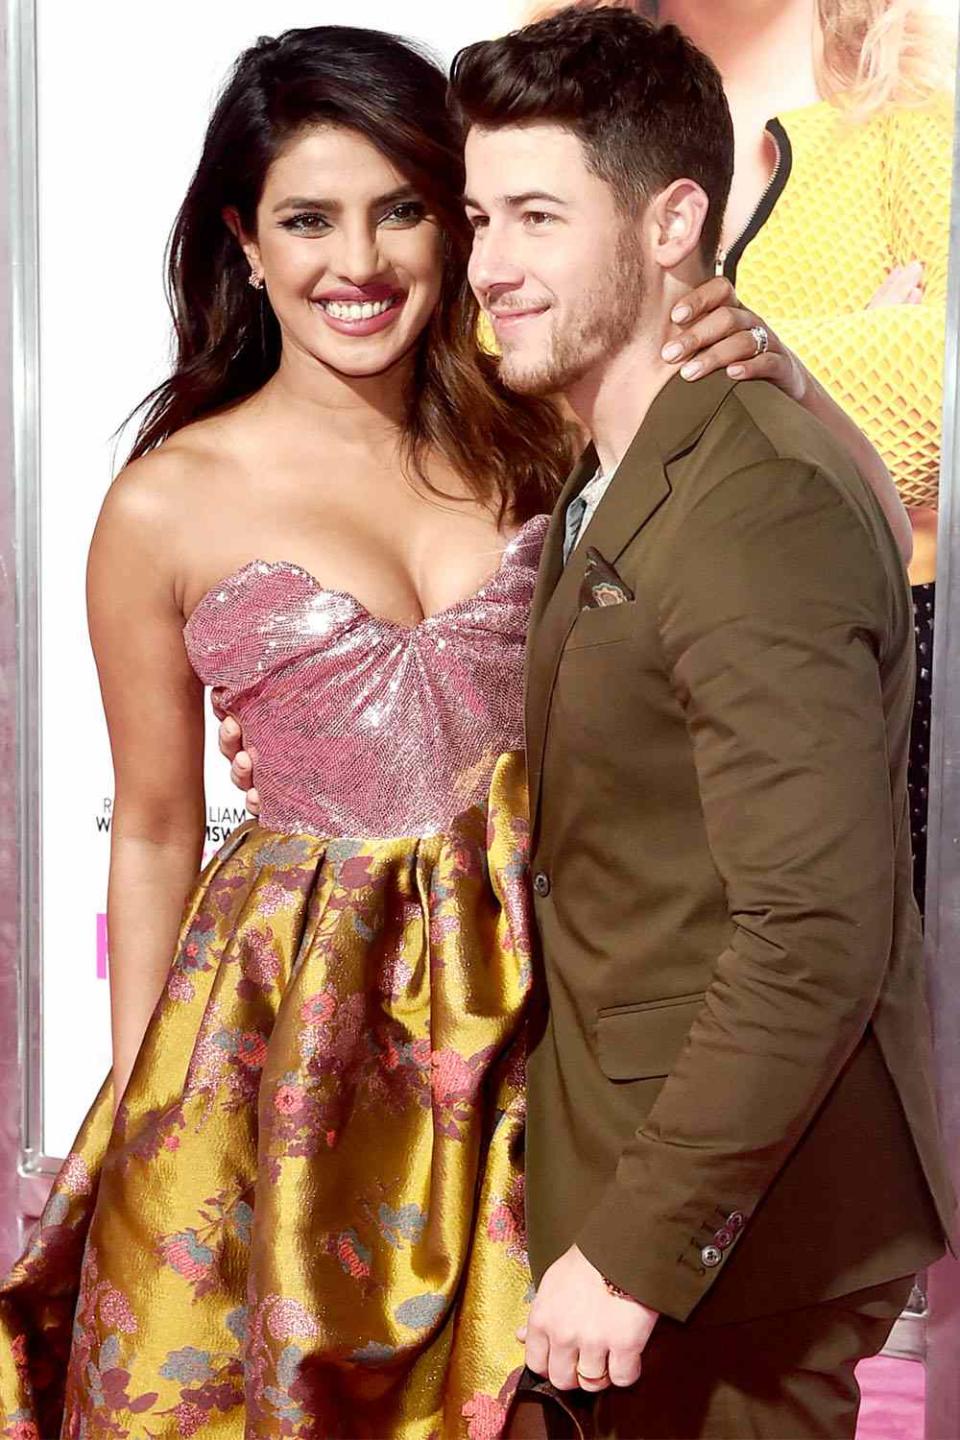 LOS ANGELES, CALIFORNIA - FEBRUARY 11: (L-R) Priyanka Chopra and Nick Jonas attend the premiere of Warner Bros. Pictures' "Isn't It Romantic" at The Theatre at Ace Hotel on February 11, 2019 in Los Angeles, California. (Photo by Alberto E. Rodriguez/Getty Images)